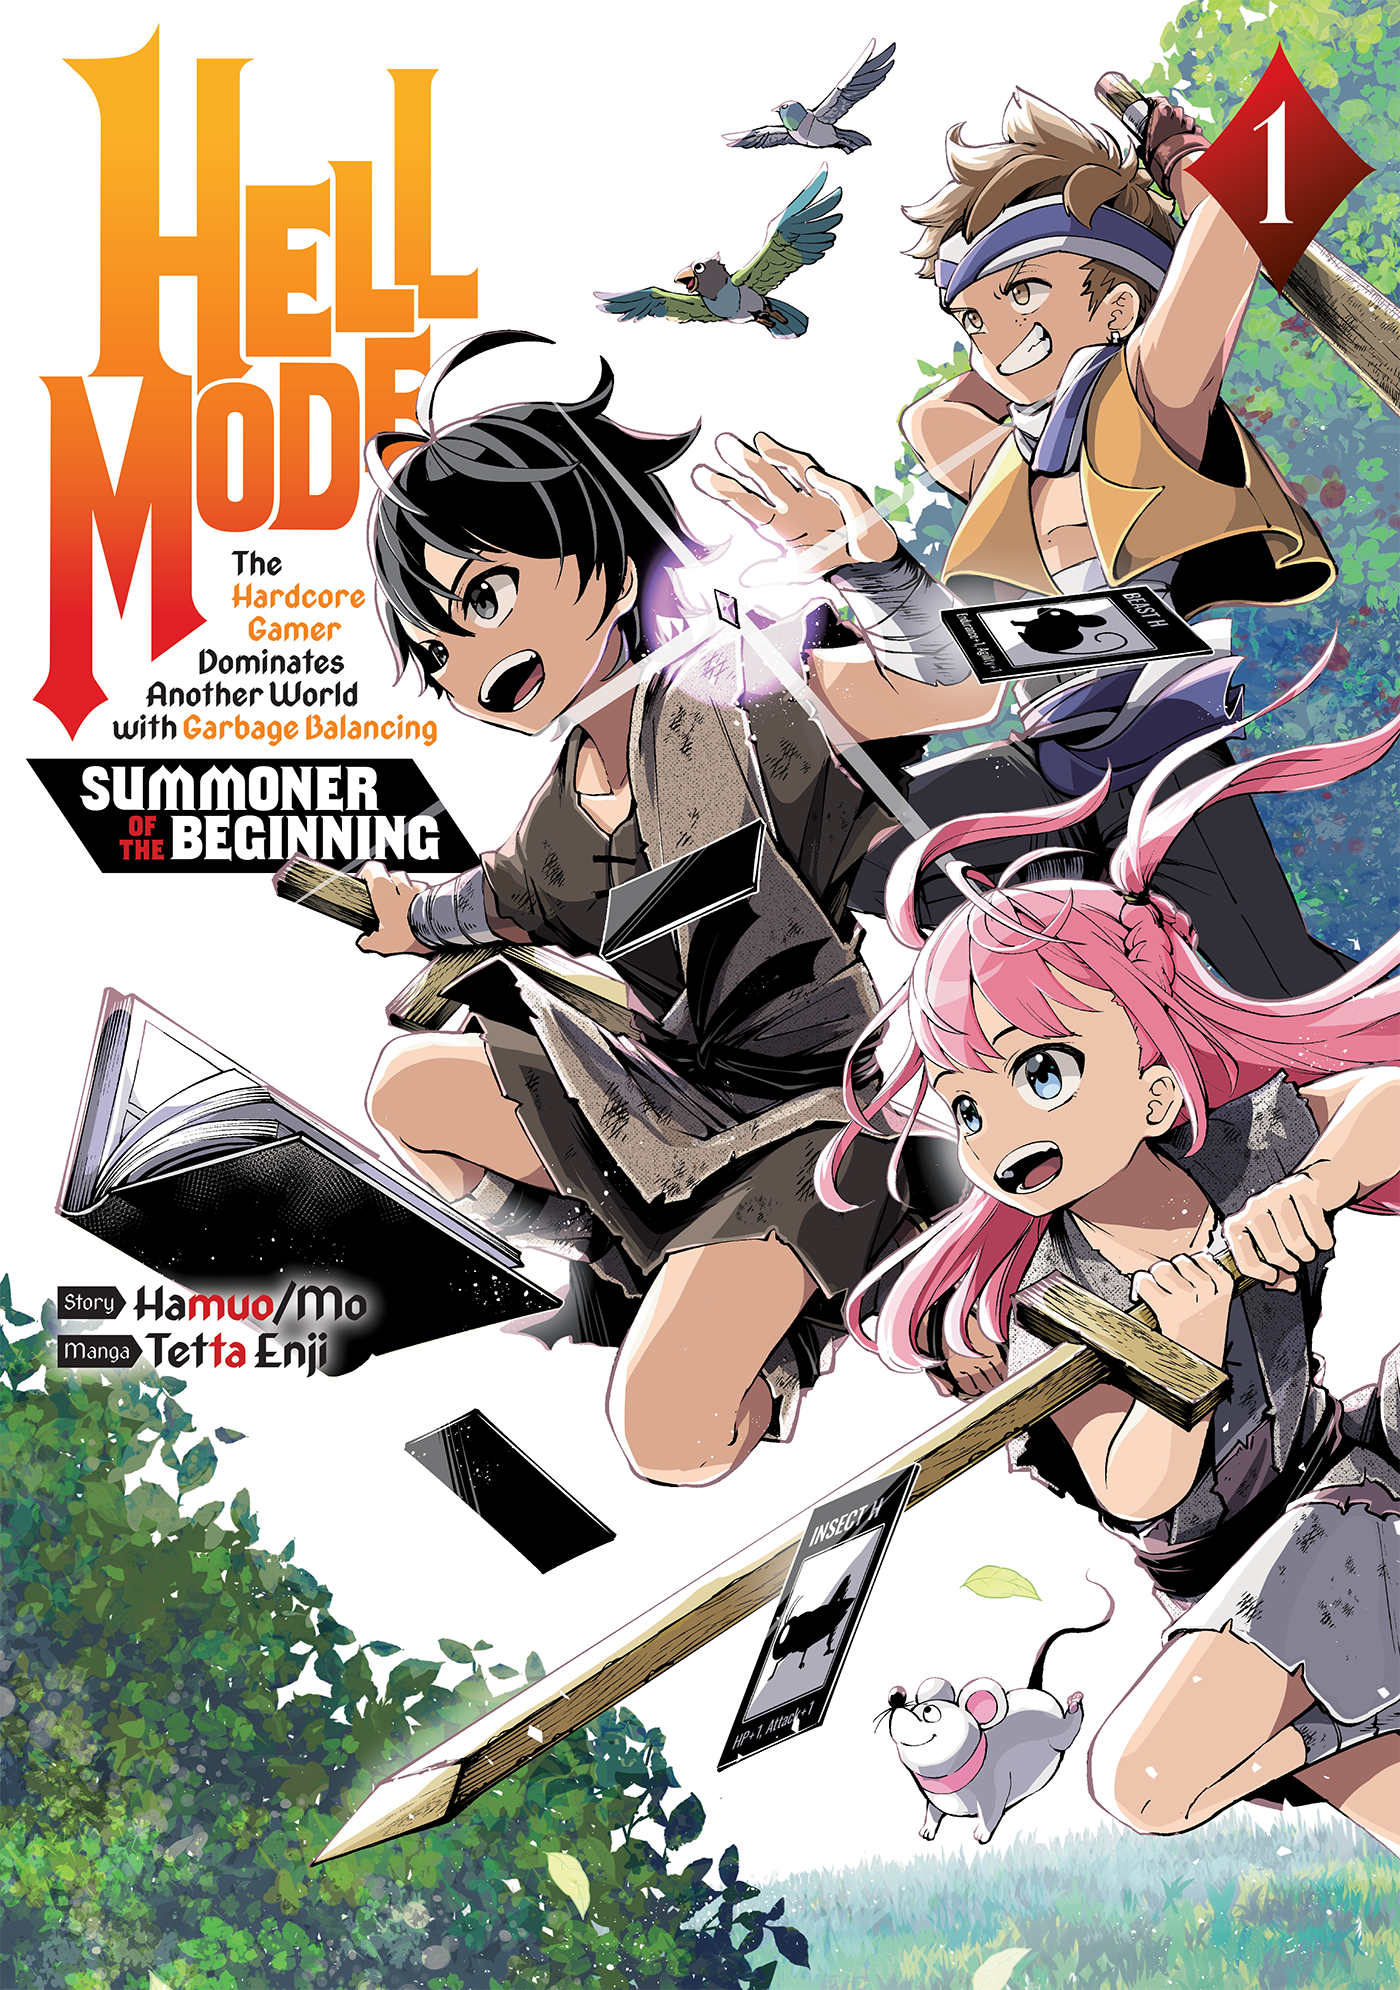 Hell Mode: The Hardcore Gamer Dominates in Another World with Garbage Balancing (Manga) by Tetta Enji (Art), Hamuo (Story), Mo (Character Designs)